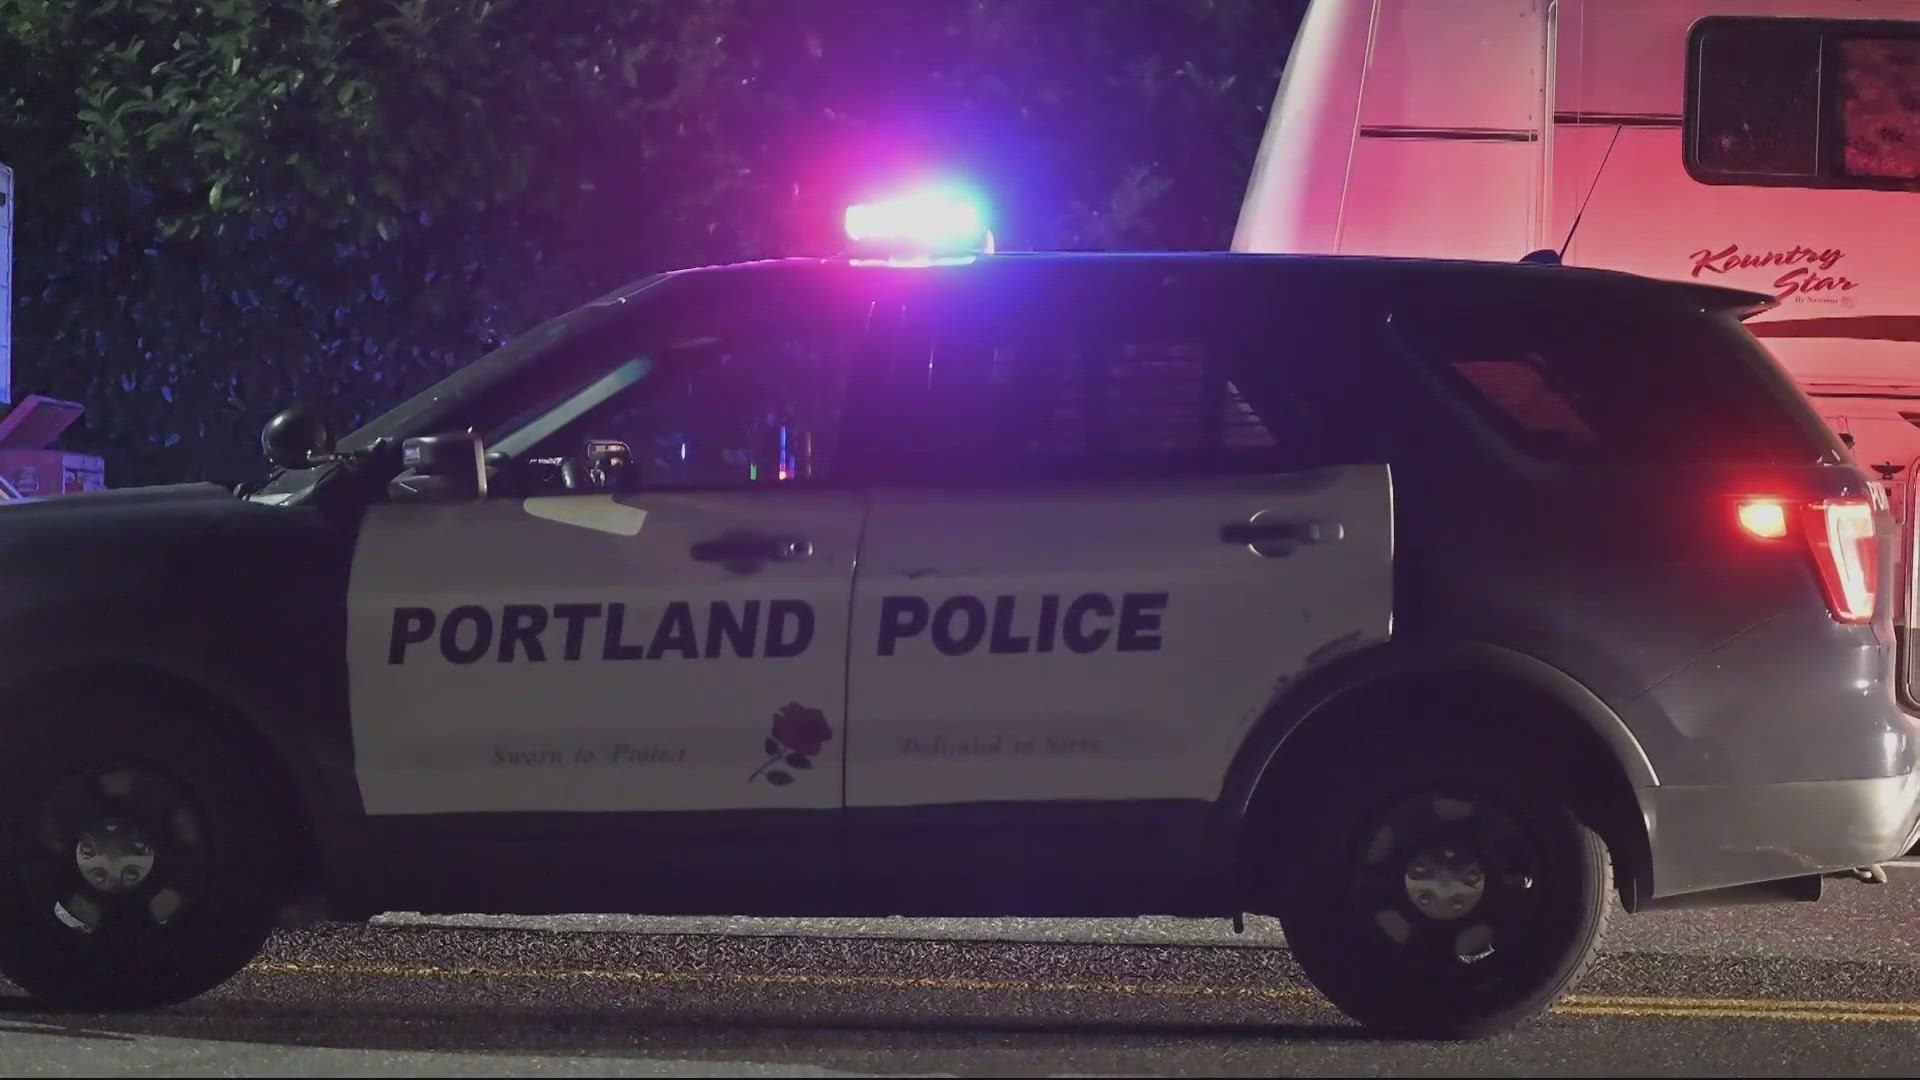 Police are looking for a suspect involved in a hit-and-run that killed a man in Northeast Portland early Friday morning.